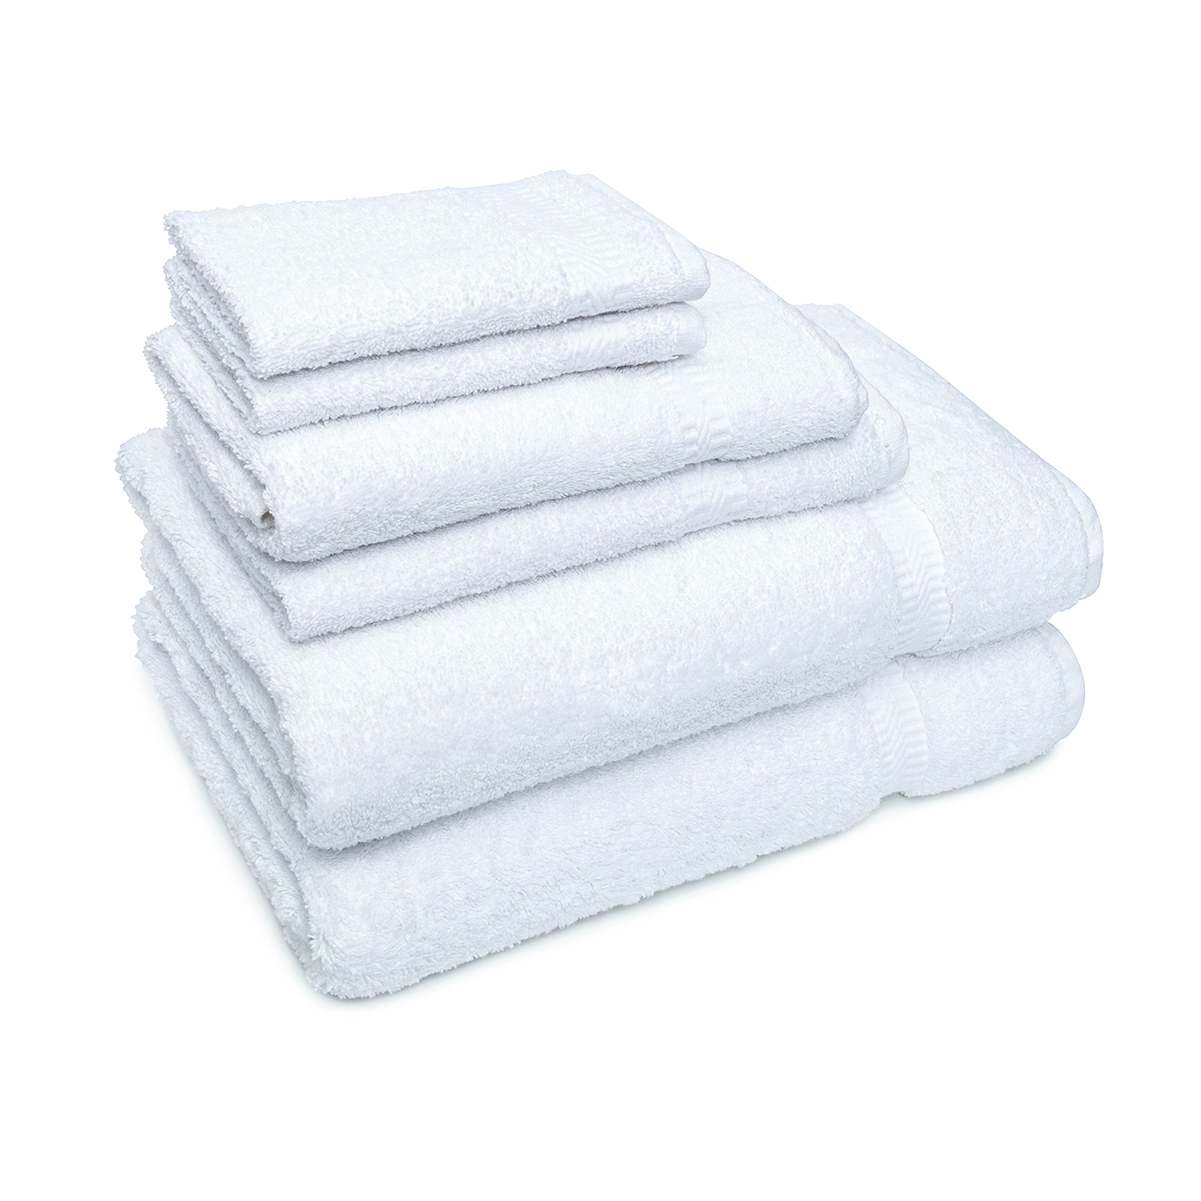 Which ADI towels are deemed essential like the Plush Hotel Towels?